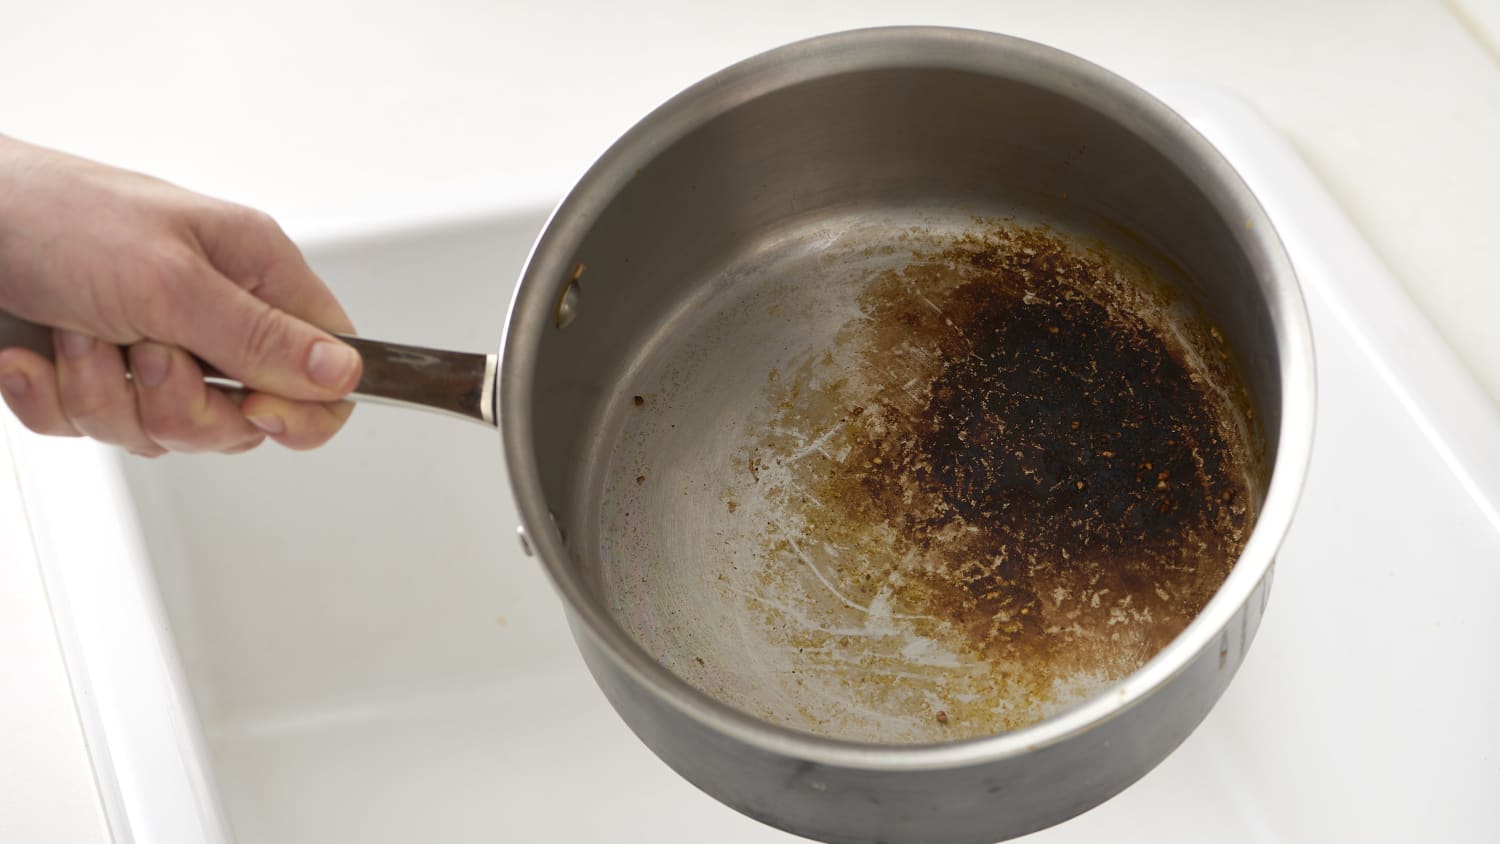 How To Clean A Burnt Pot: 5 Tricks Professionals Use